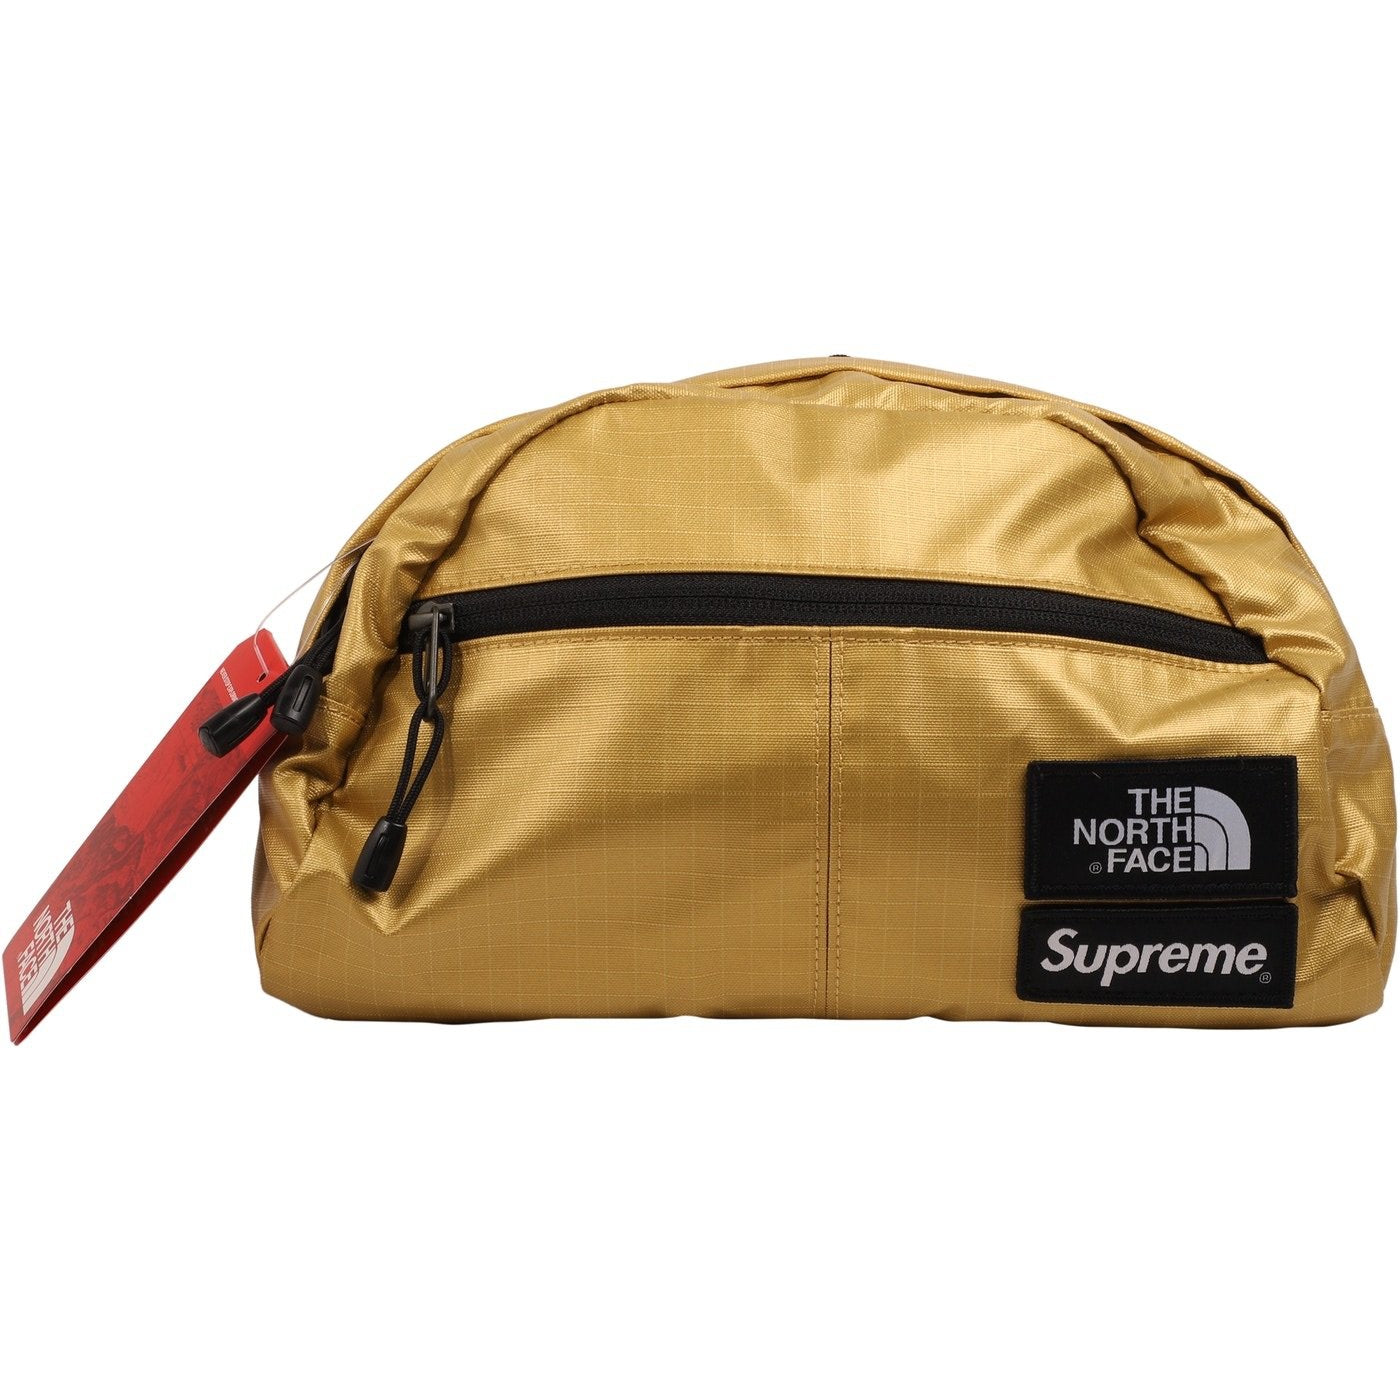 Supreme x North face “Gold” waist bag - Centrall Online